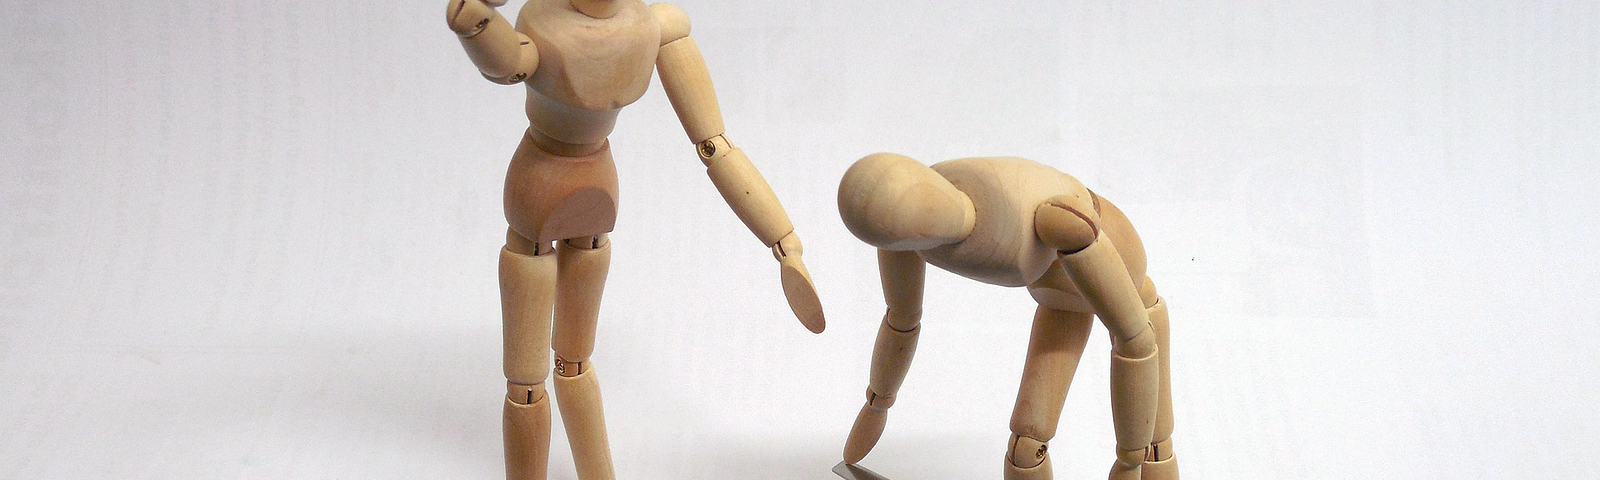 Two wooden painting figures (mannequins) are trying to get to a computer keyboard tied with a chain and locked with a padlock